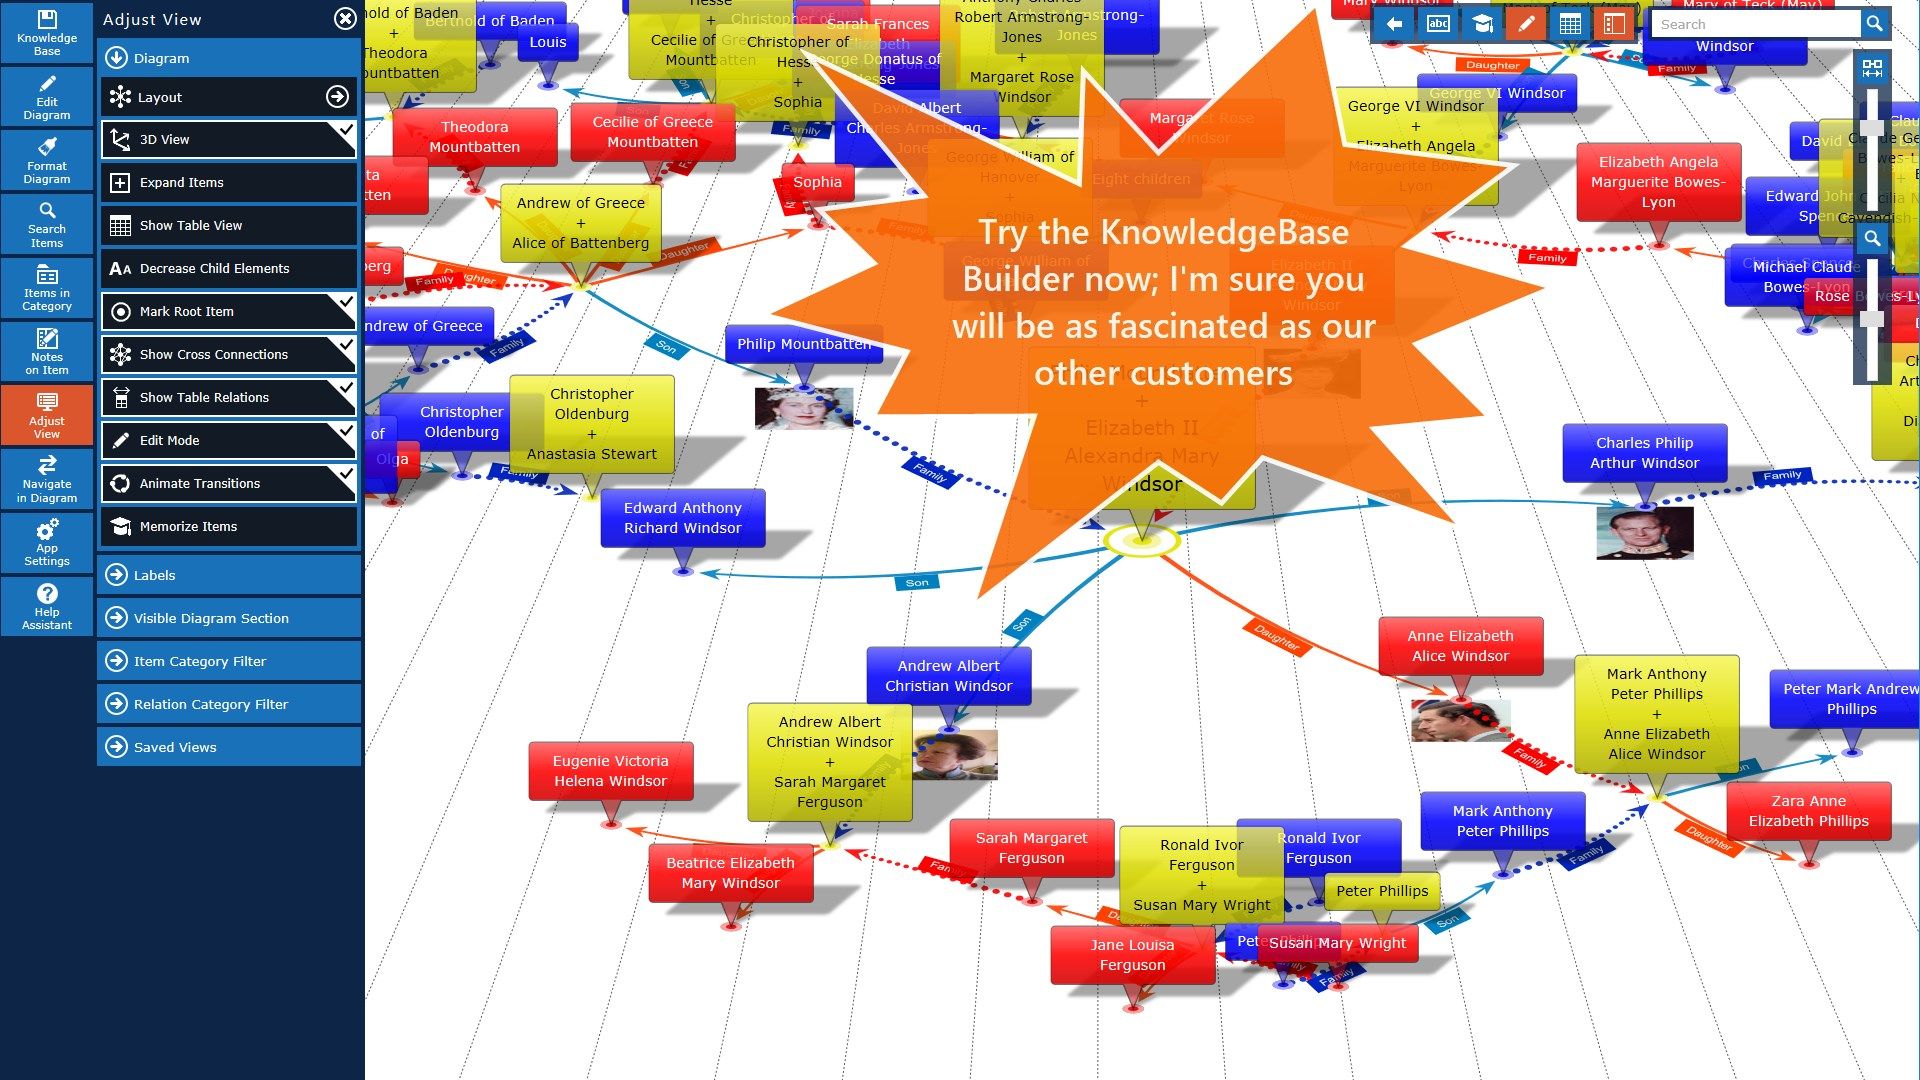 Try the KnowledgeBase Builder now; I'm sure you will be as fascinated as our other customers